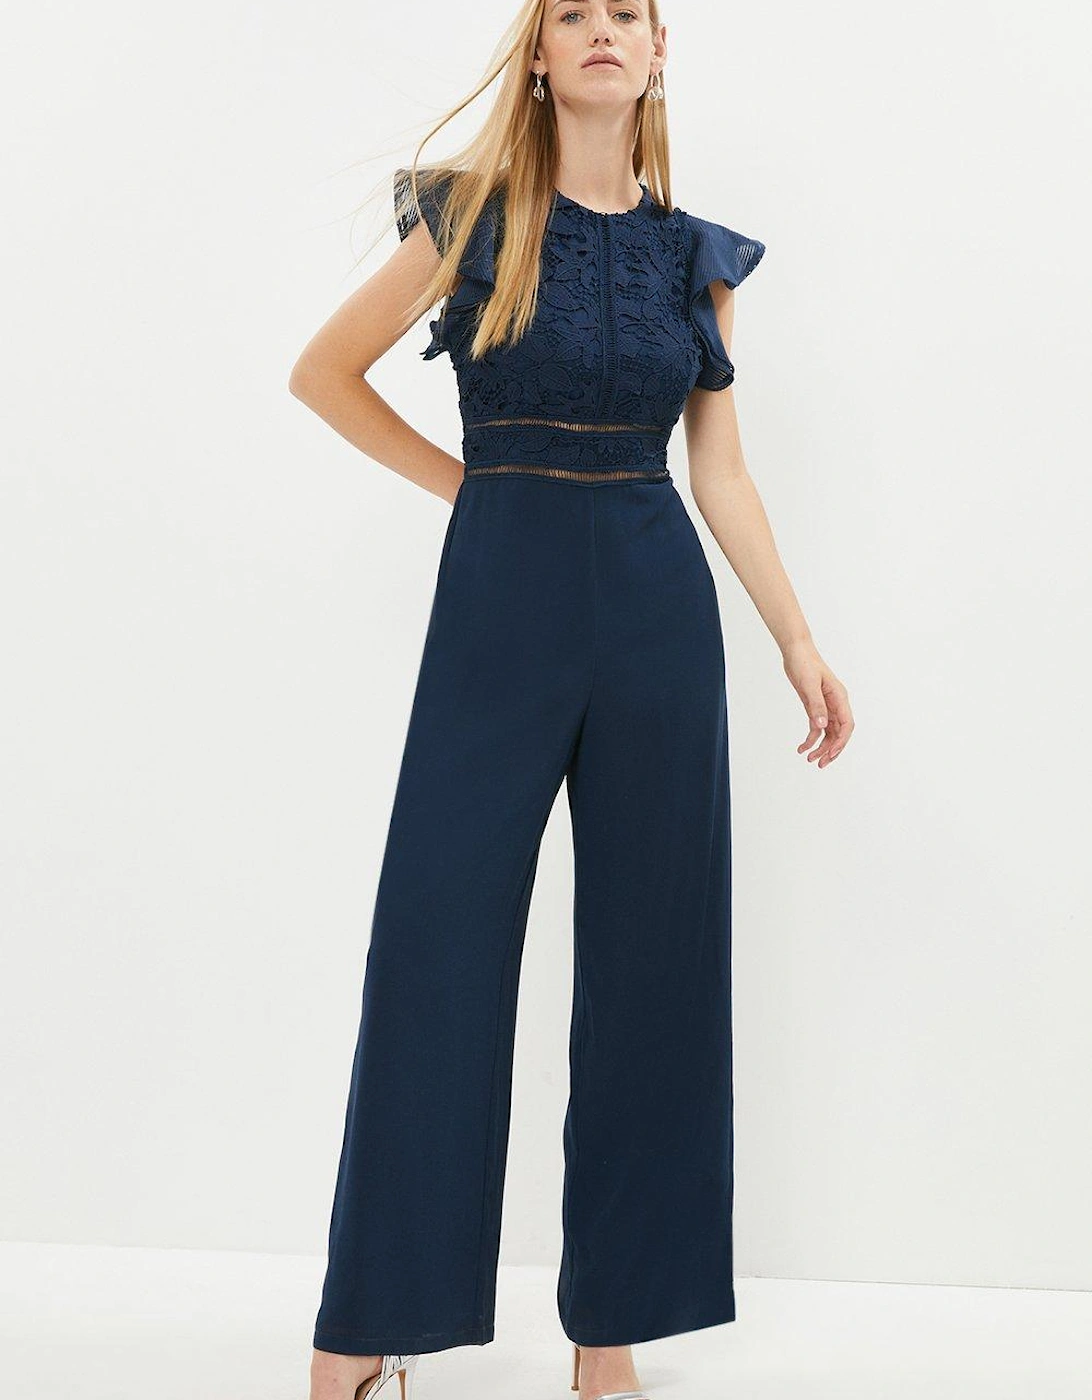 Organza And Trim Insert Lace Top Jumpsuit